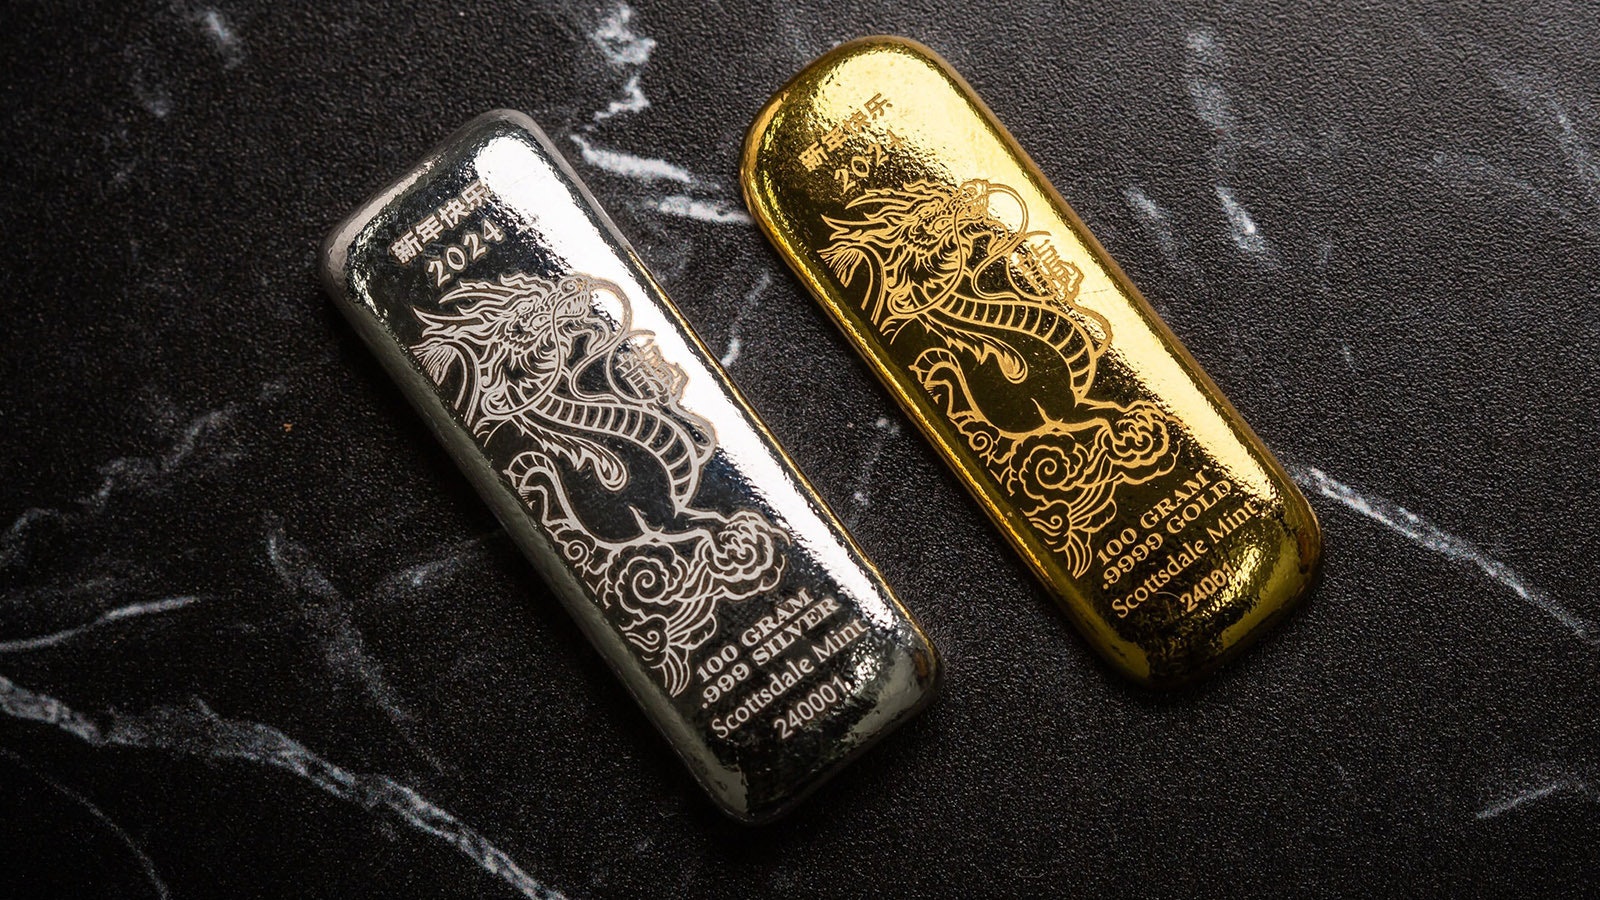 Cast gold and silver dragon bars.